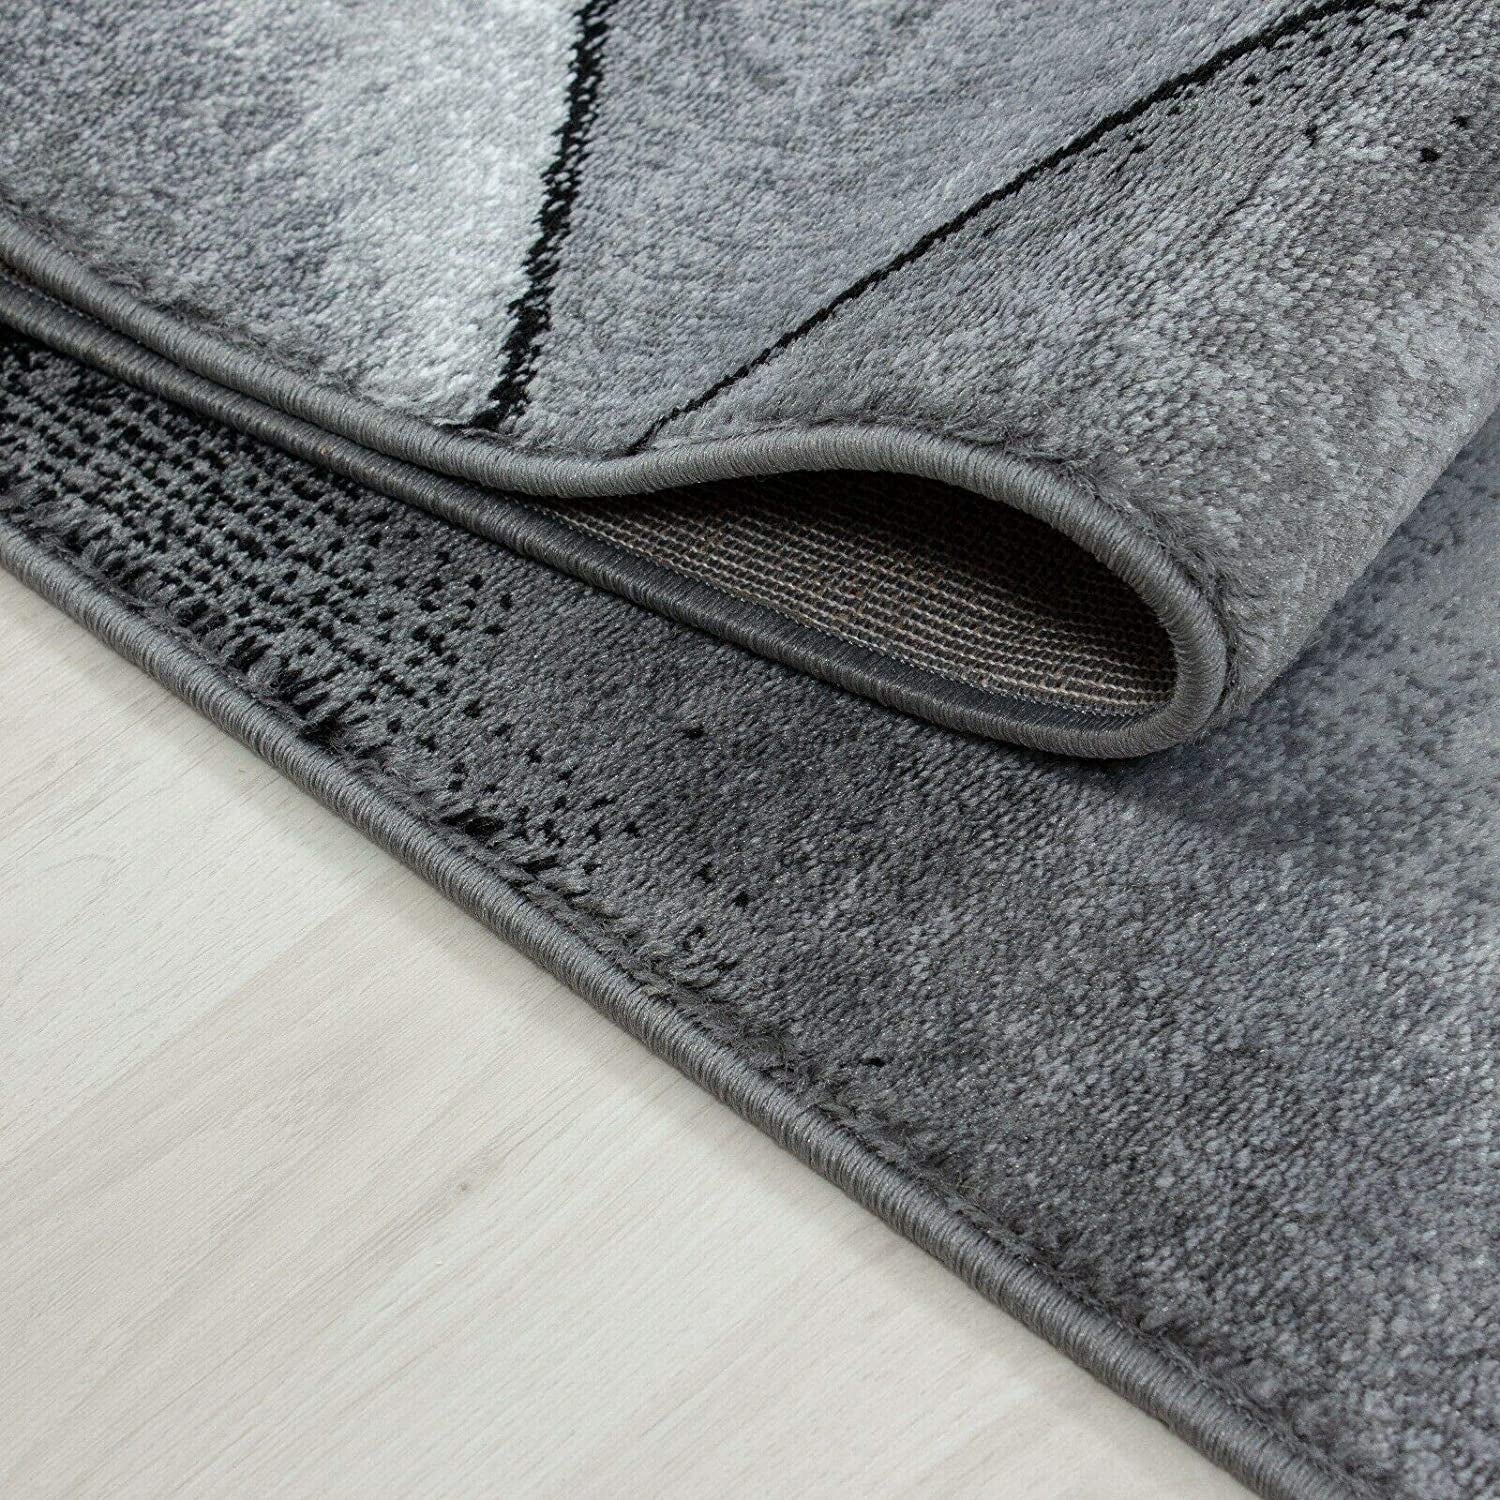 Rug CUBIC Modern Design Black Grey Charcoal Rugs Living Room Extra Large Size Soft Touch Short Pile Style Carpet Area Rugs Non Shedding (200Cm X 290Cm (6.6Ft X 9.5Ft))